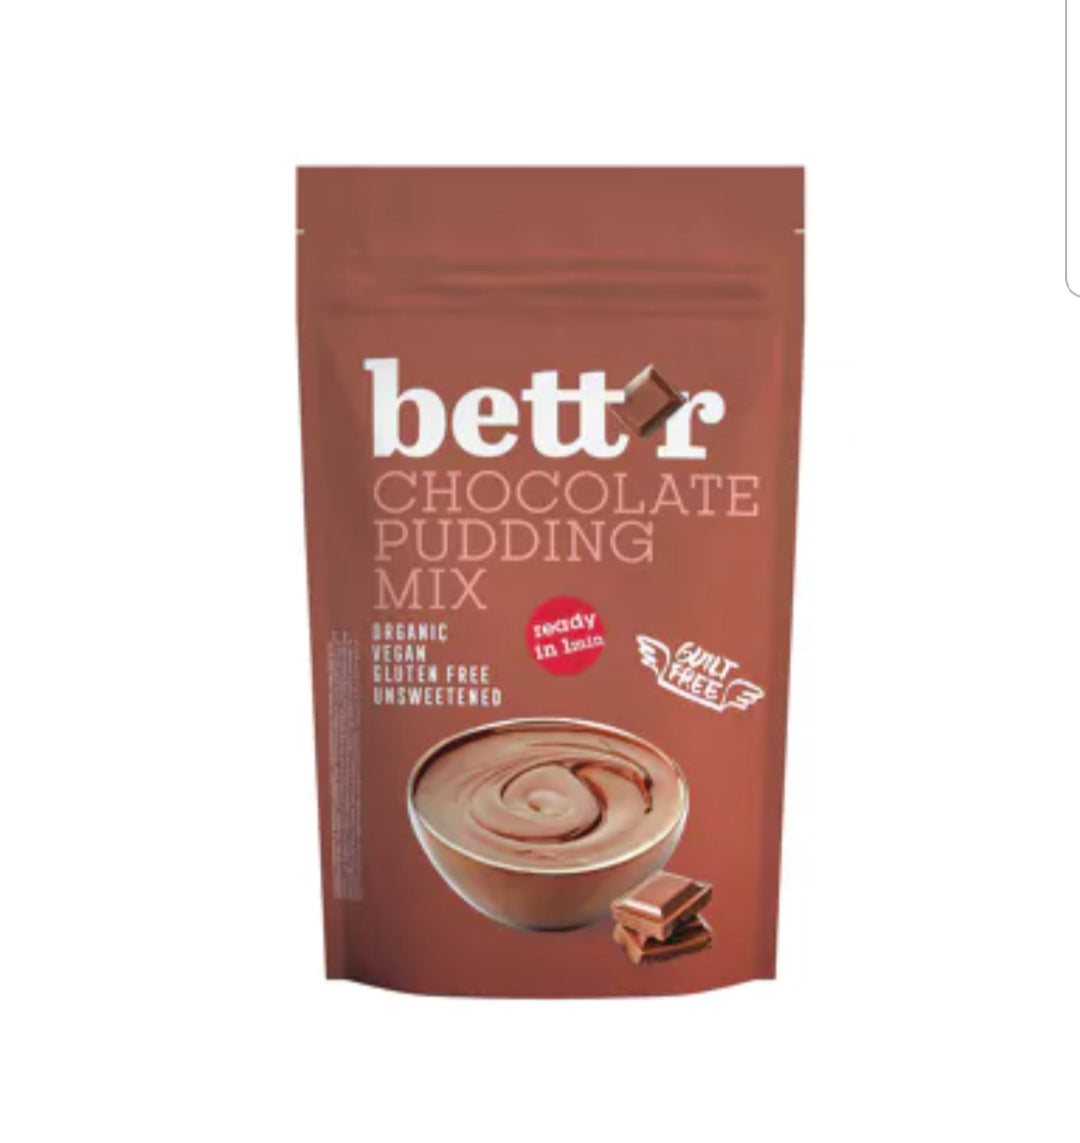 Relive Childhood Memories with bett'r Chocolate Pudding Mix